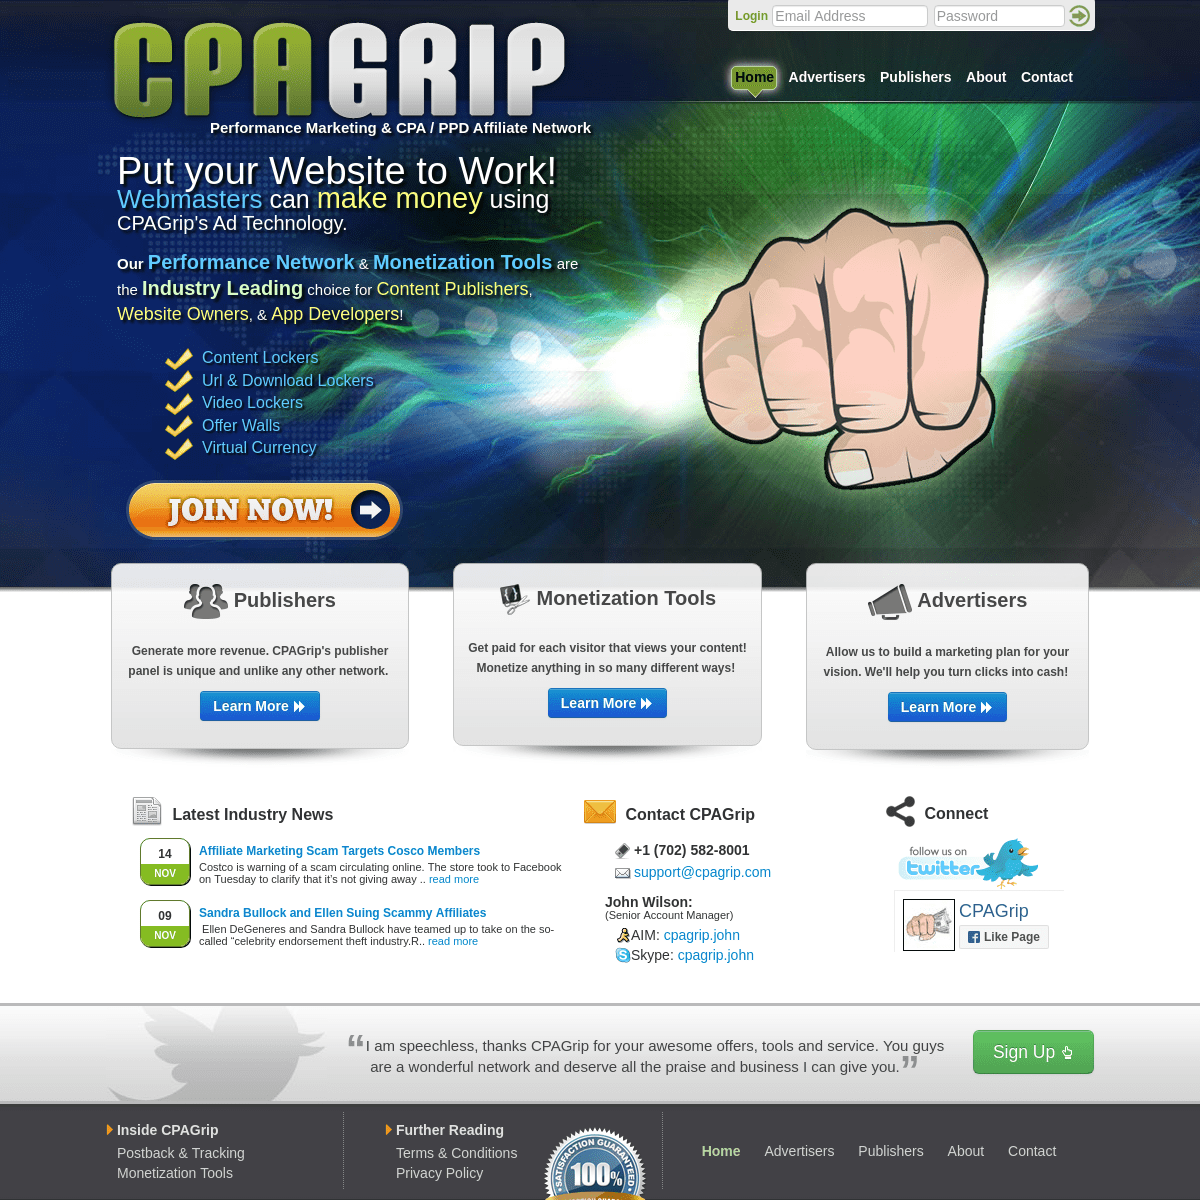 A complete backup of cpagrip.com